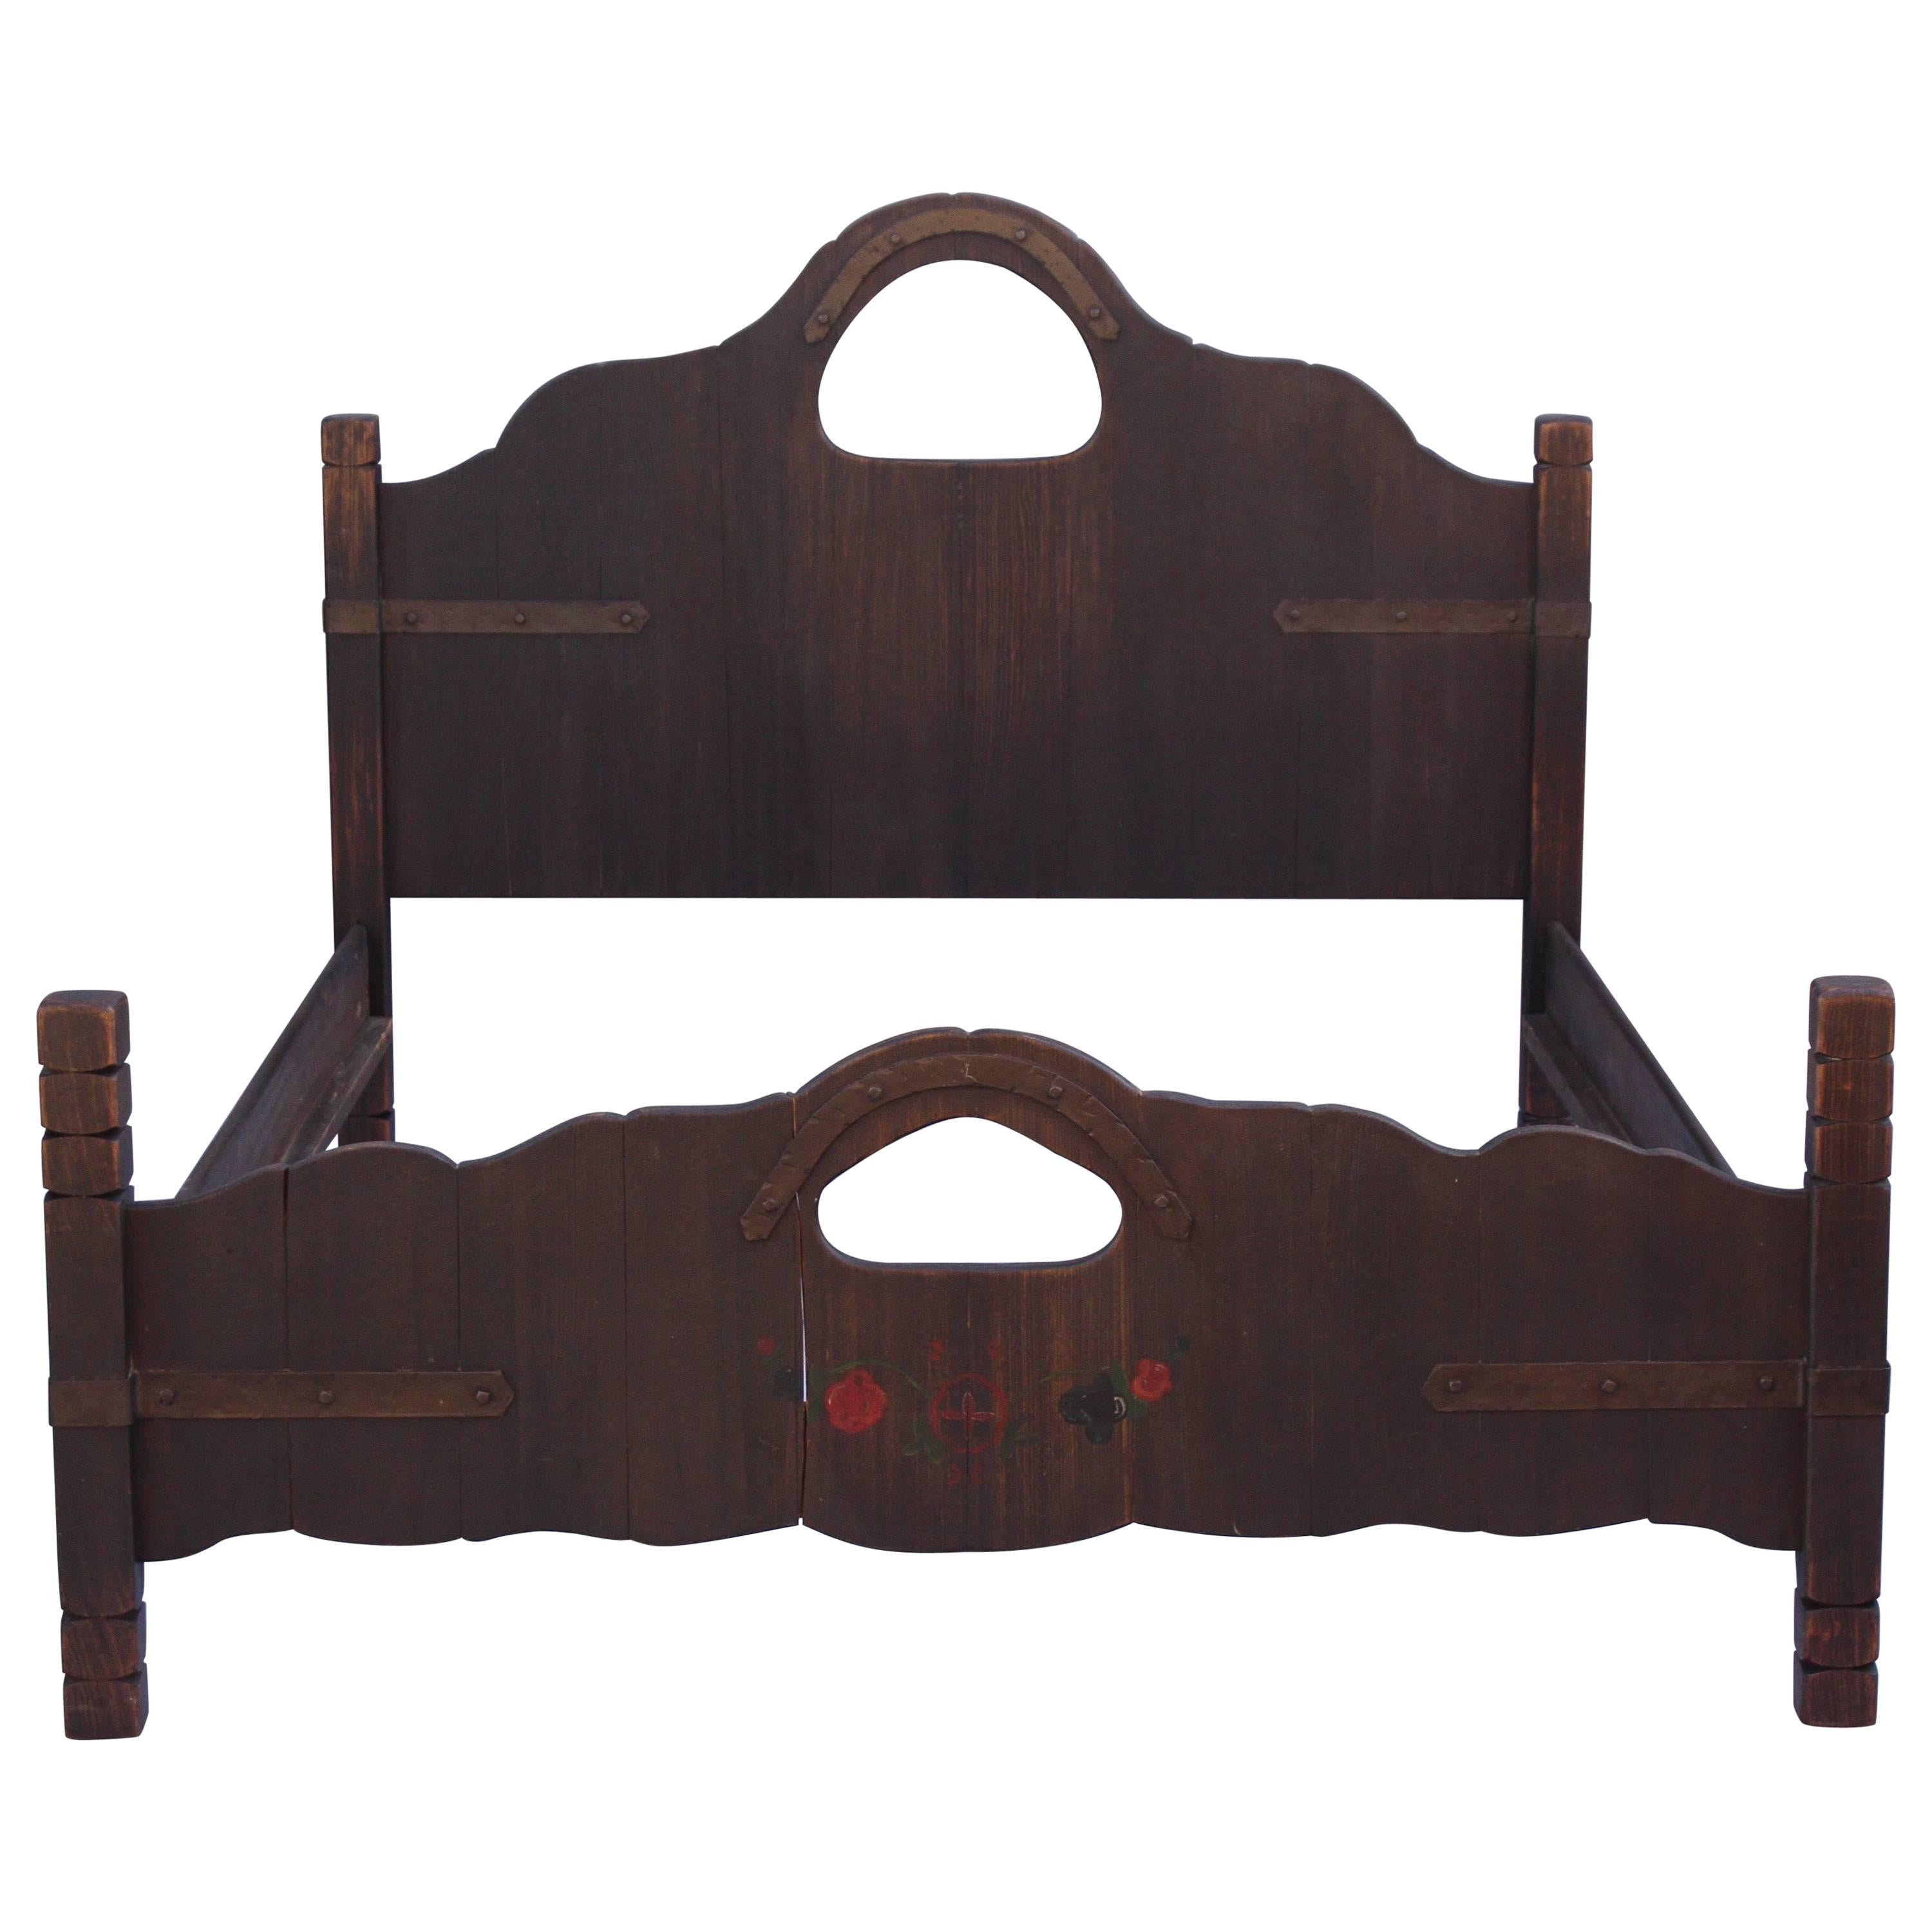 Antique Double Monterey Keyhole Bed with Old Wood Finish